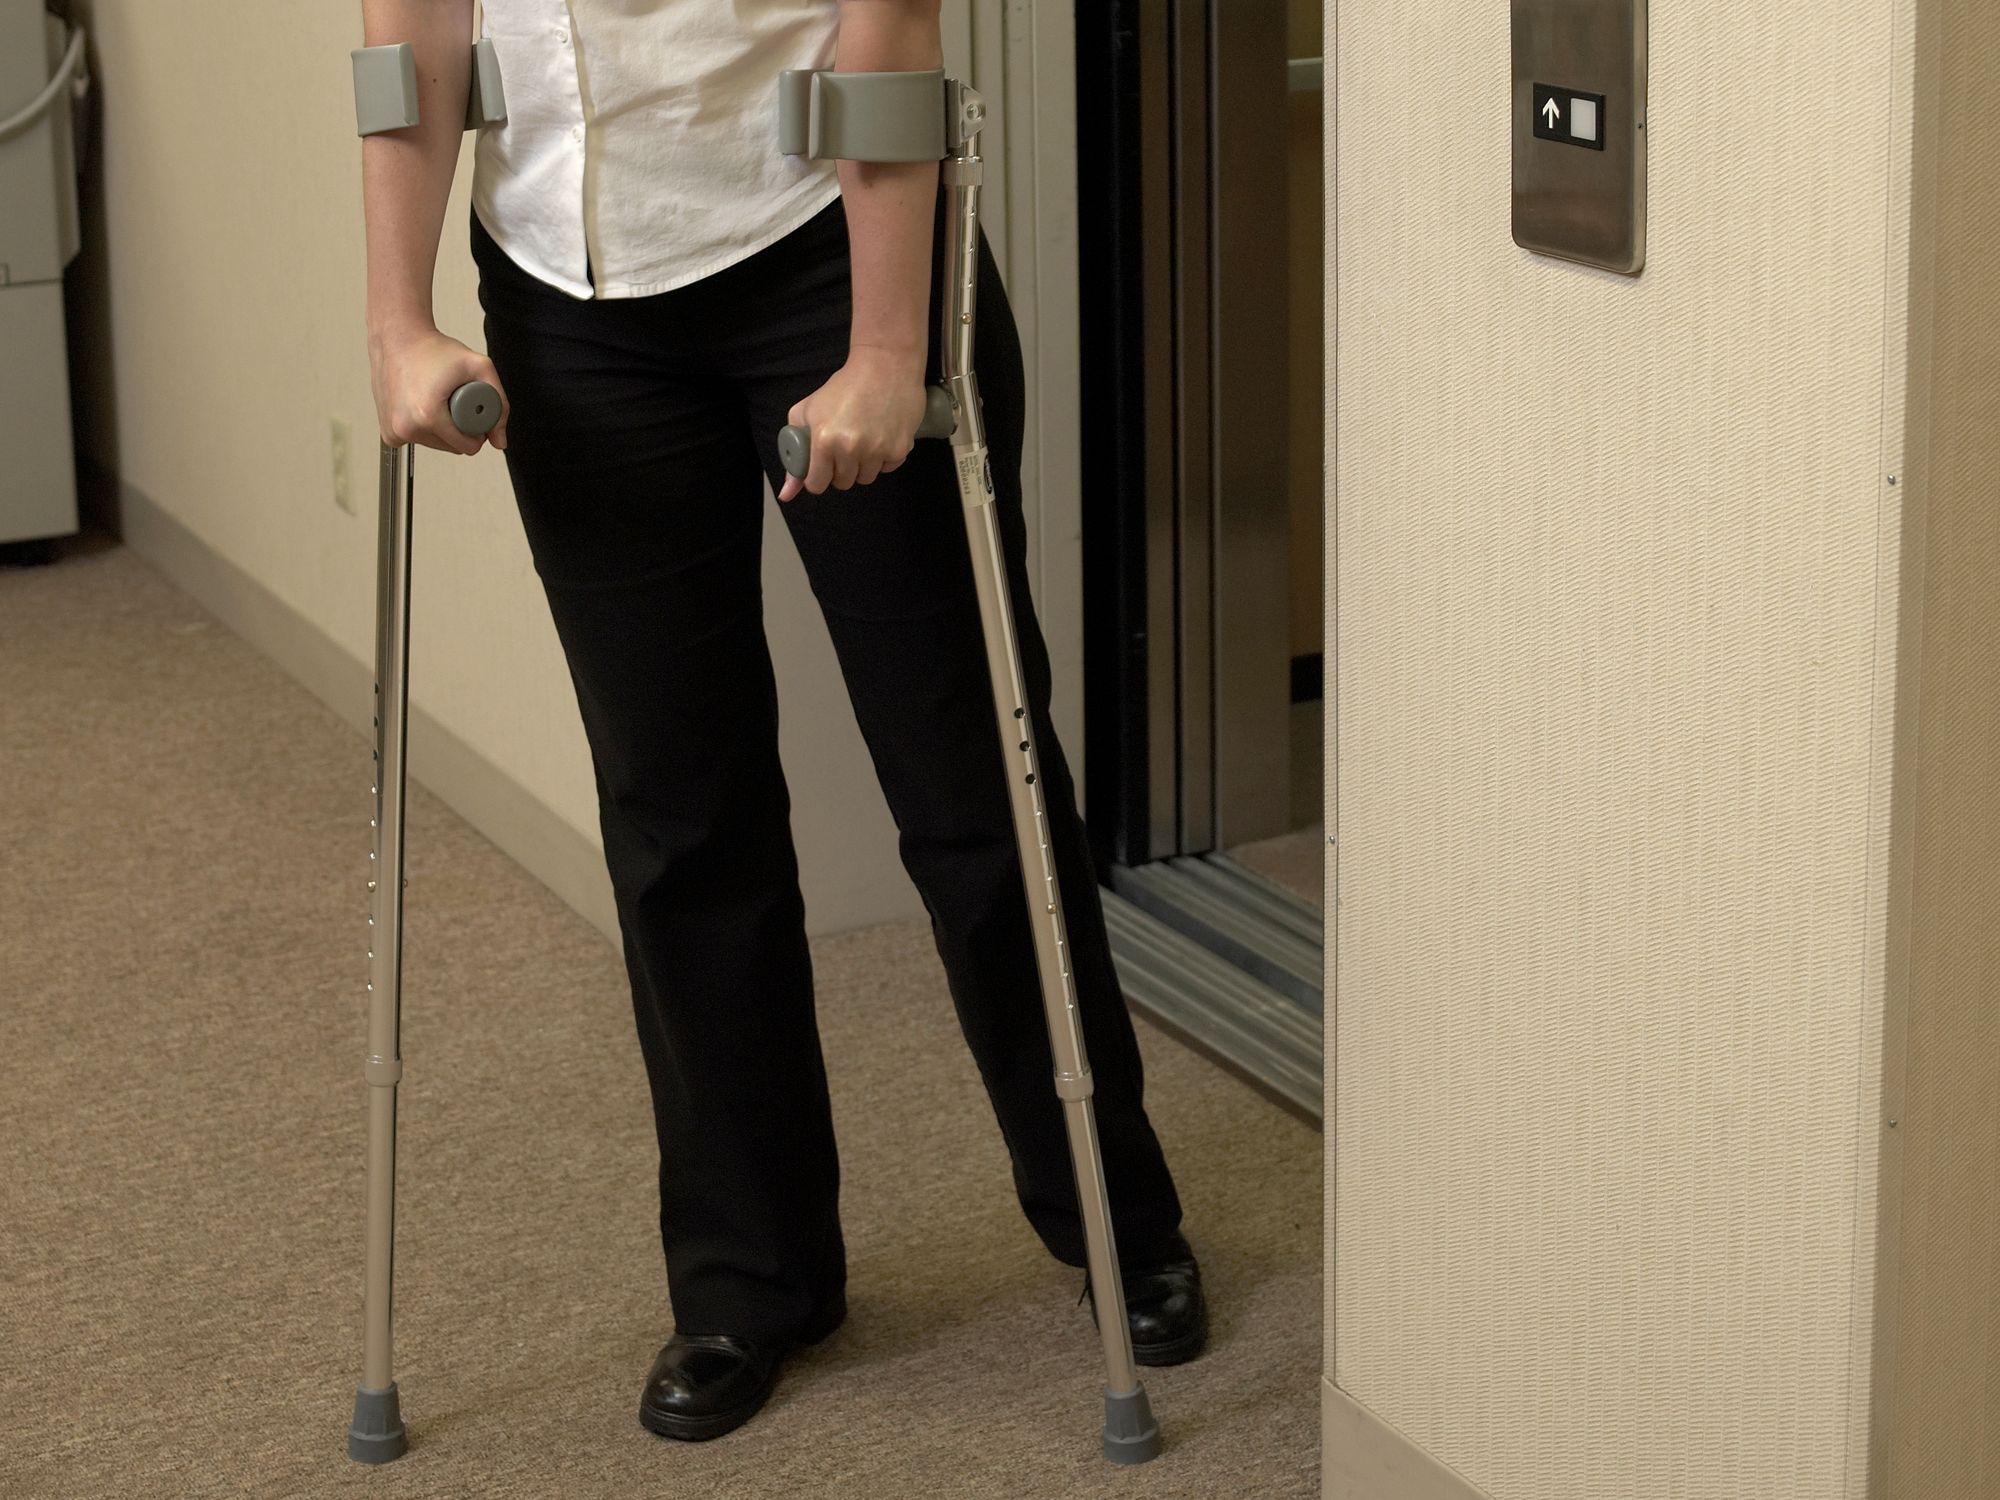 What is disability discrimination?